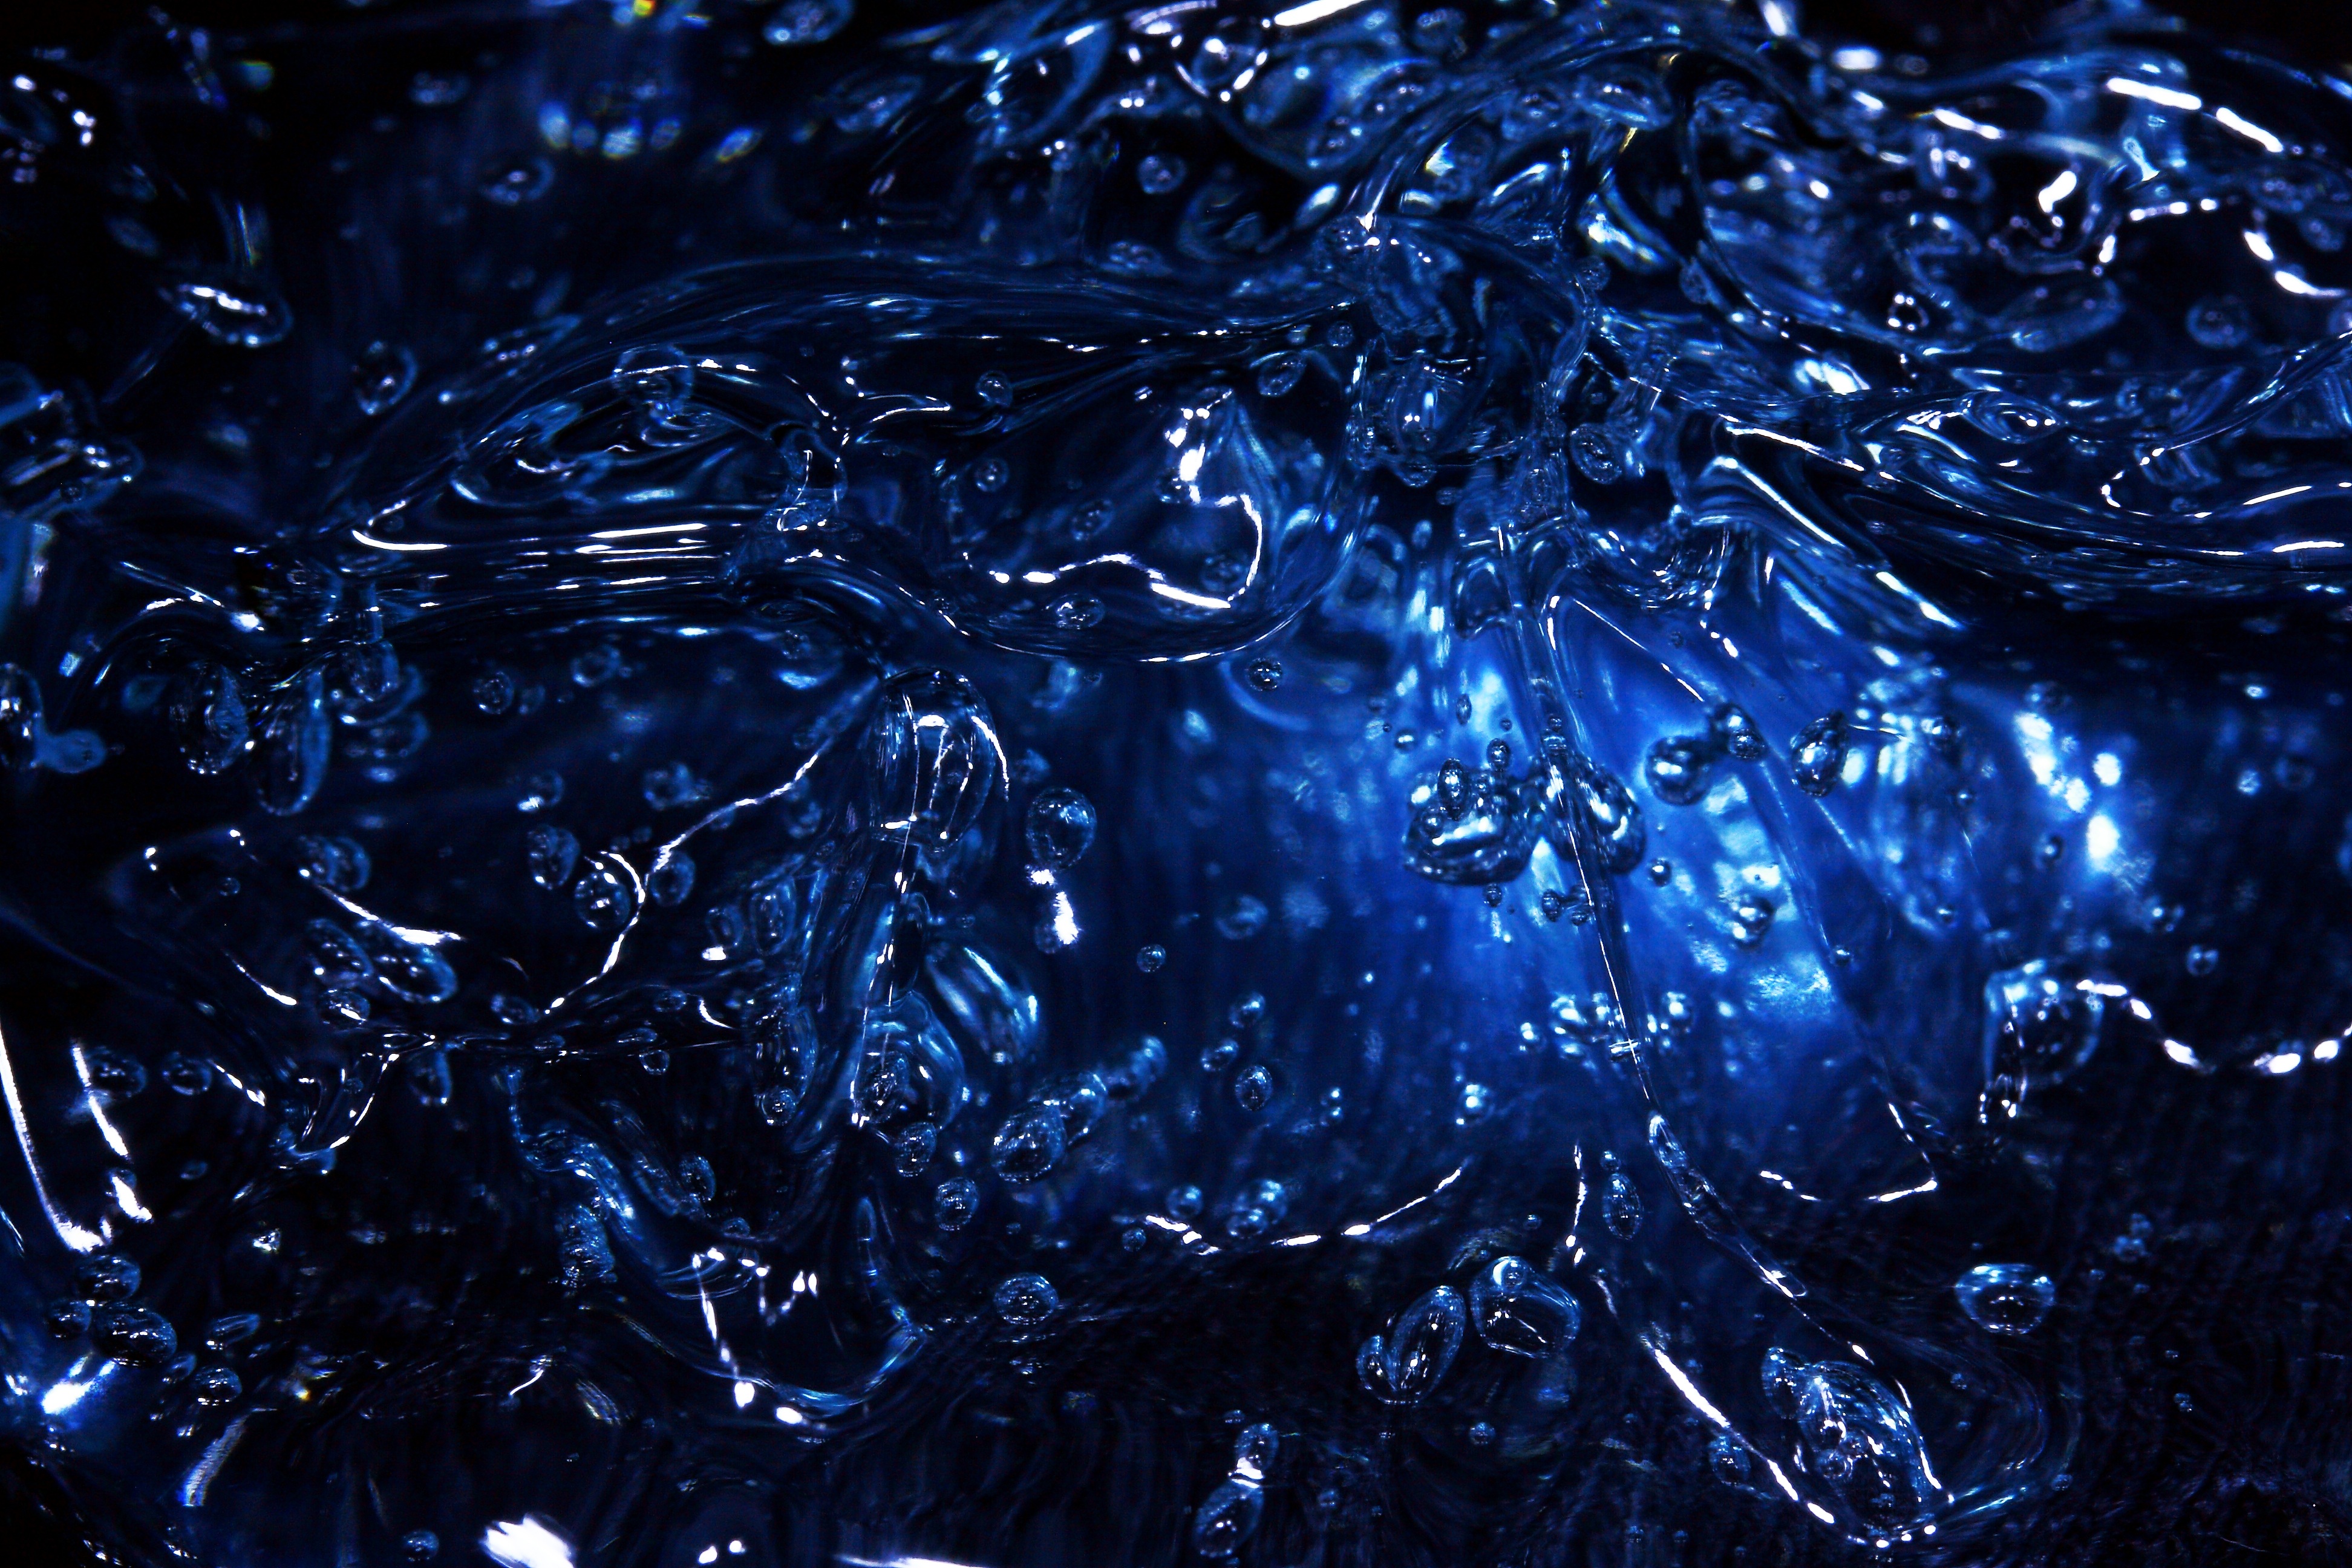 8k Water Images